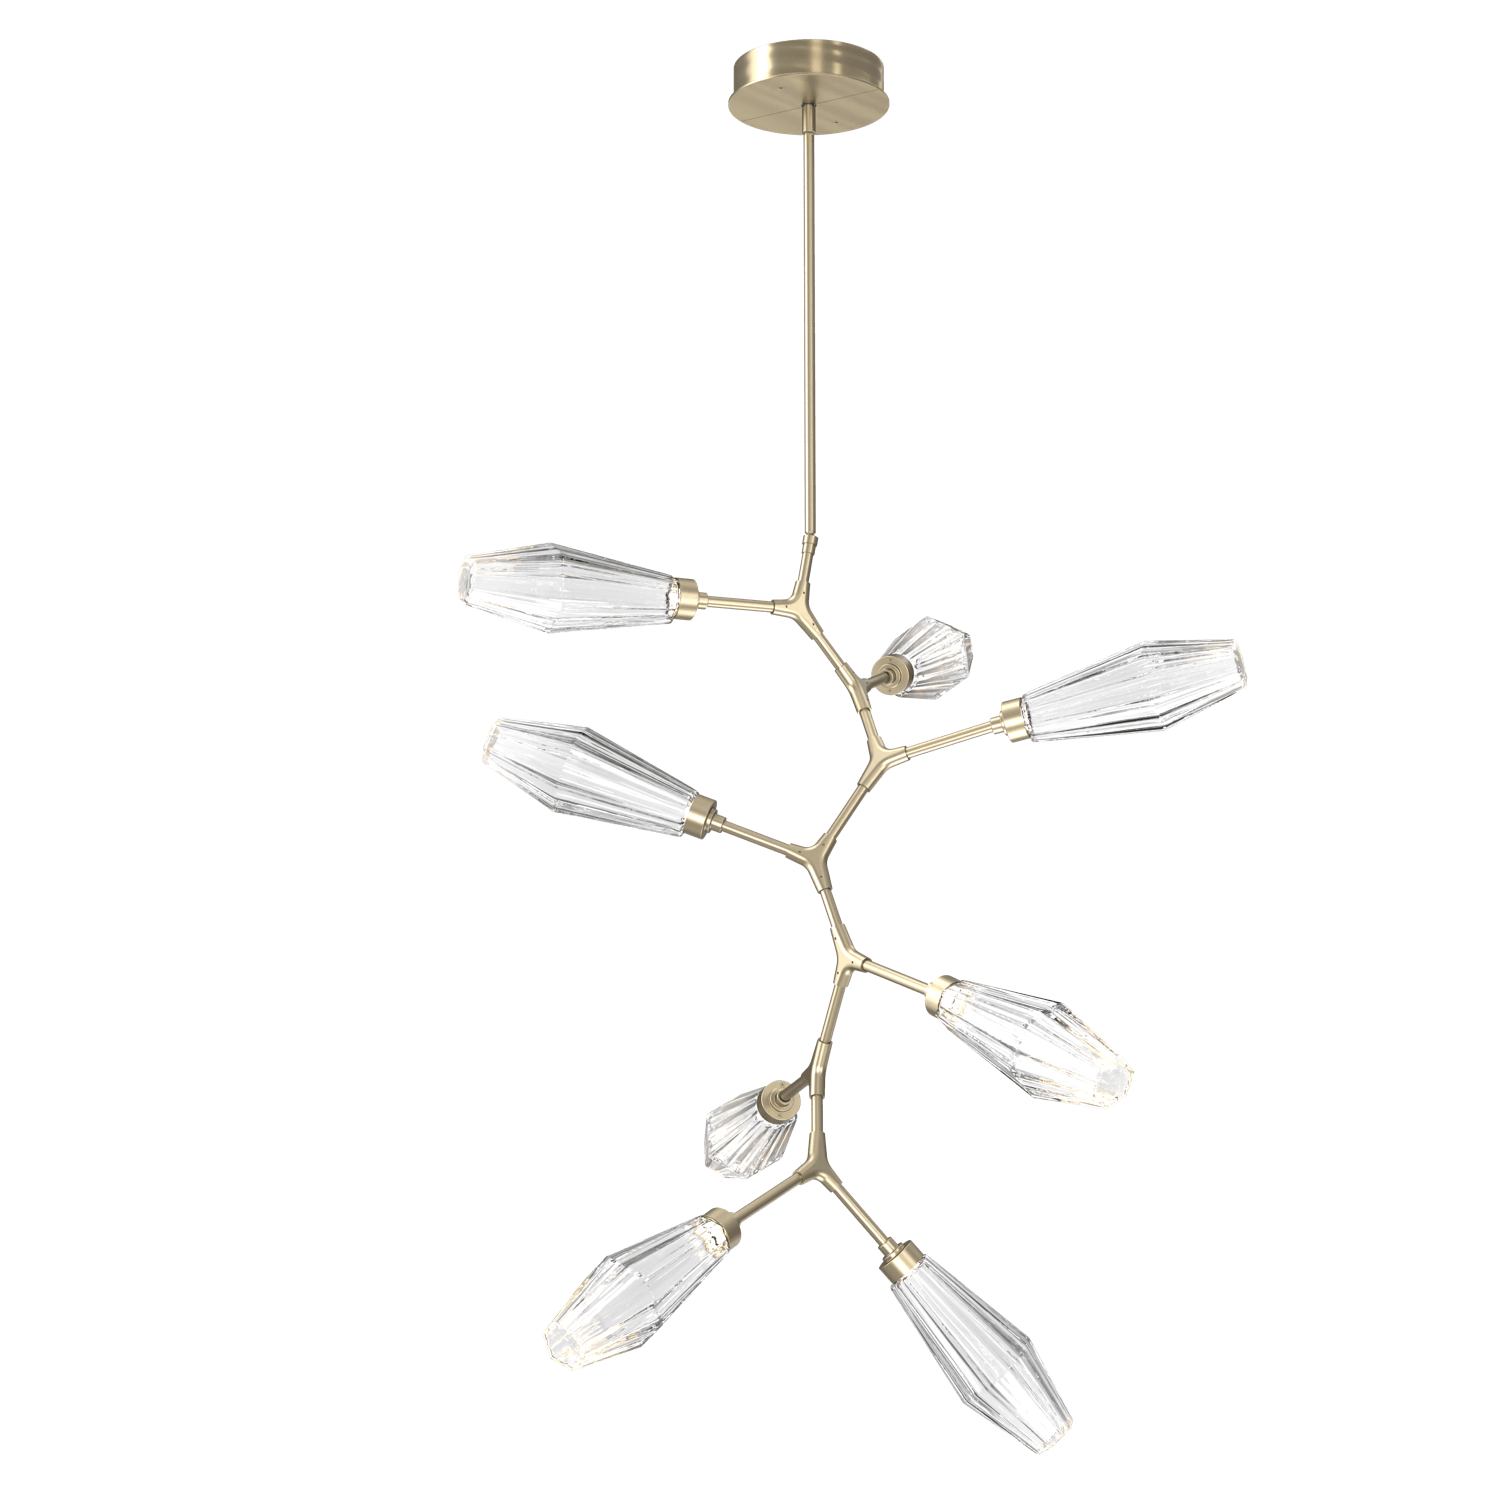 CHB0049-VB-HB-RC-Hammerton-Studio-Aalto-8-light-modern-vine-chandelier-with-heritage-brass-finish-and-optic-ribbed-clear-glass-shades-and-LED-lamping